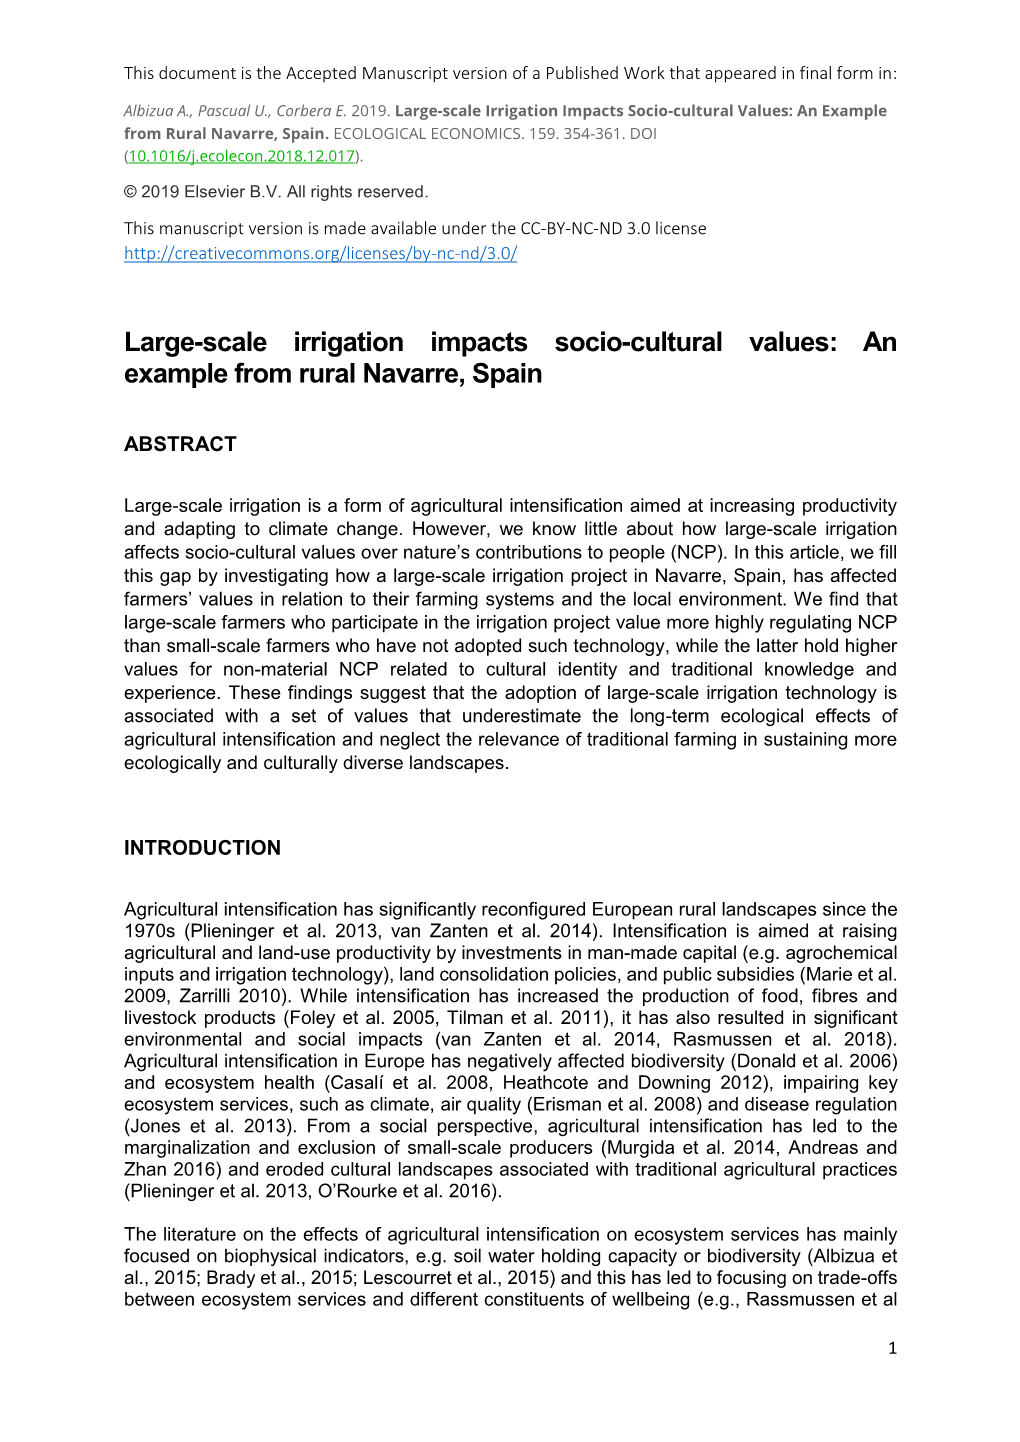 Large-Scale Irrigation Impacts Socio-Cultural Values: an Example from Rural Navarre, Spain